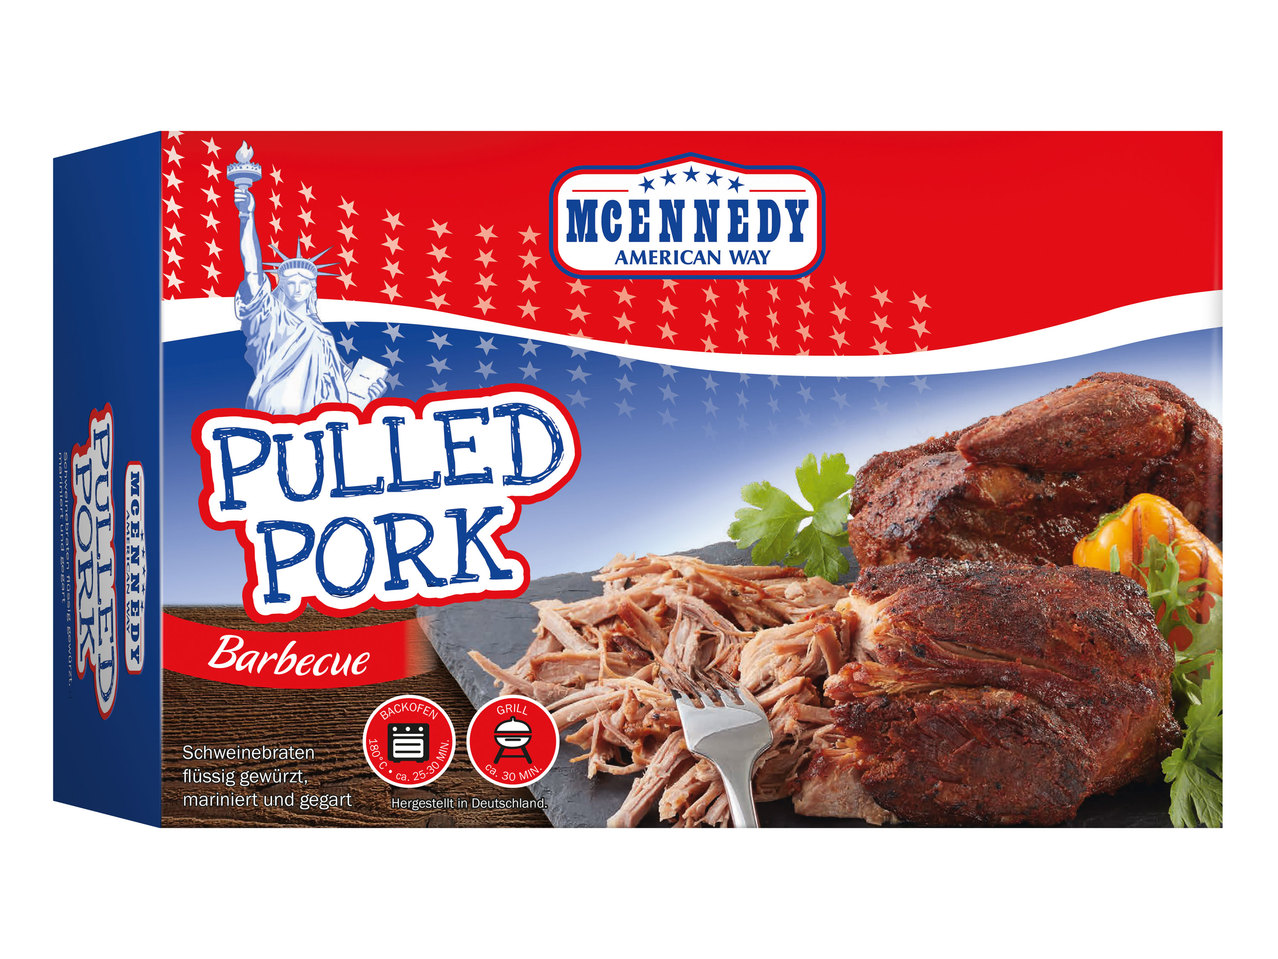 MCENNEDY Pulled Pork Barbecue